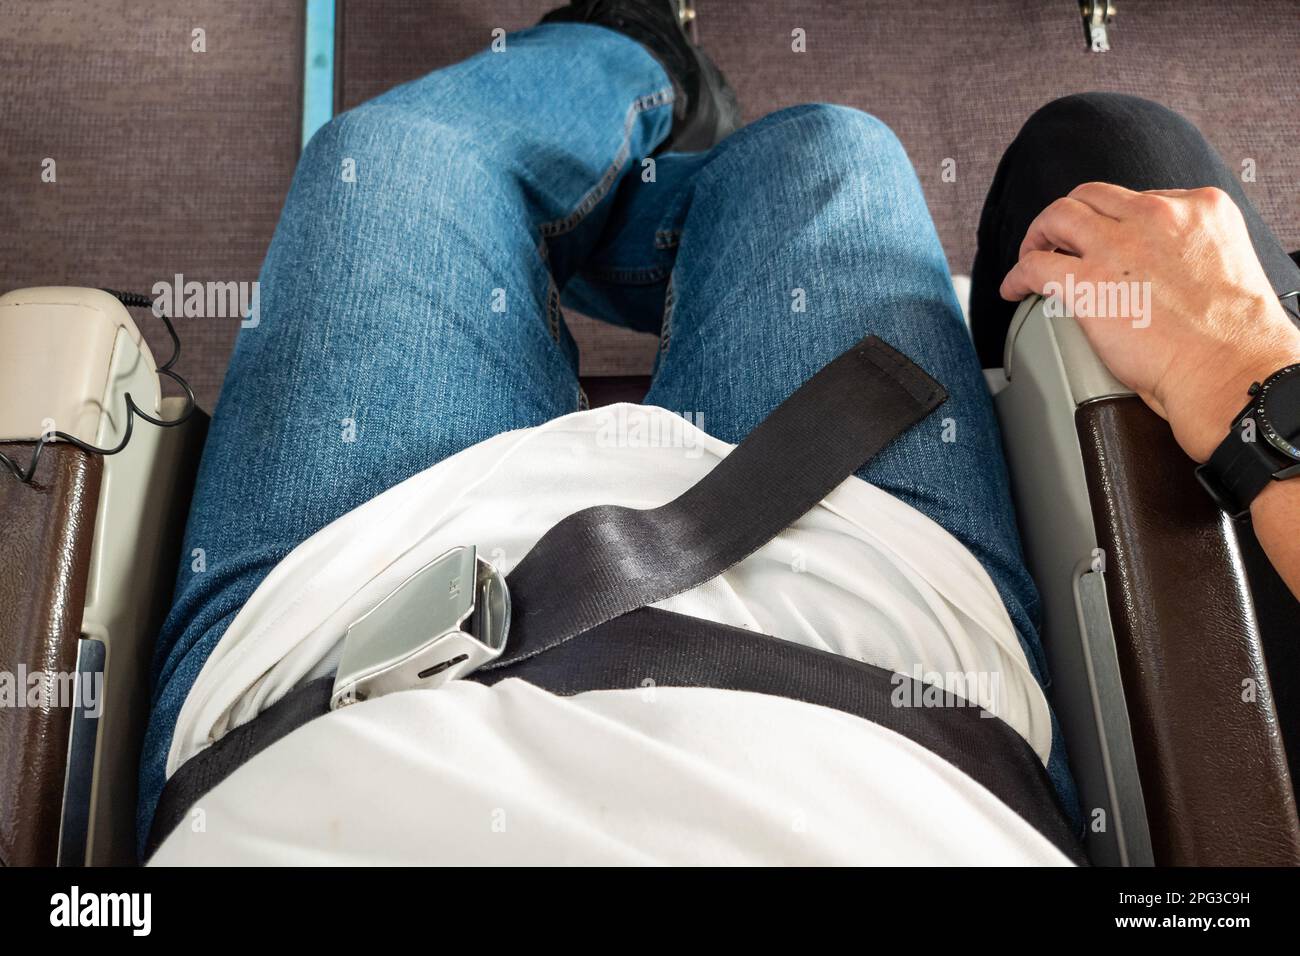 Passenger with fastened seat belt seated on aircraft seat for safety Stock Photo